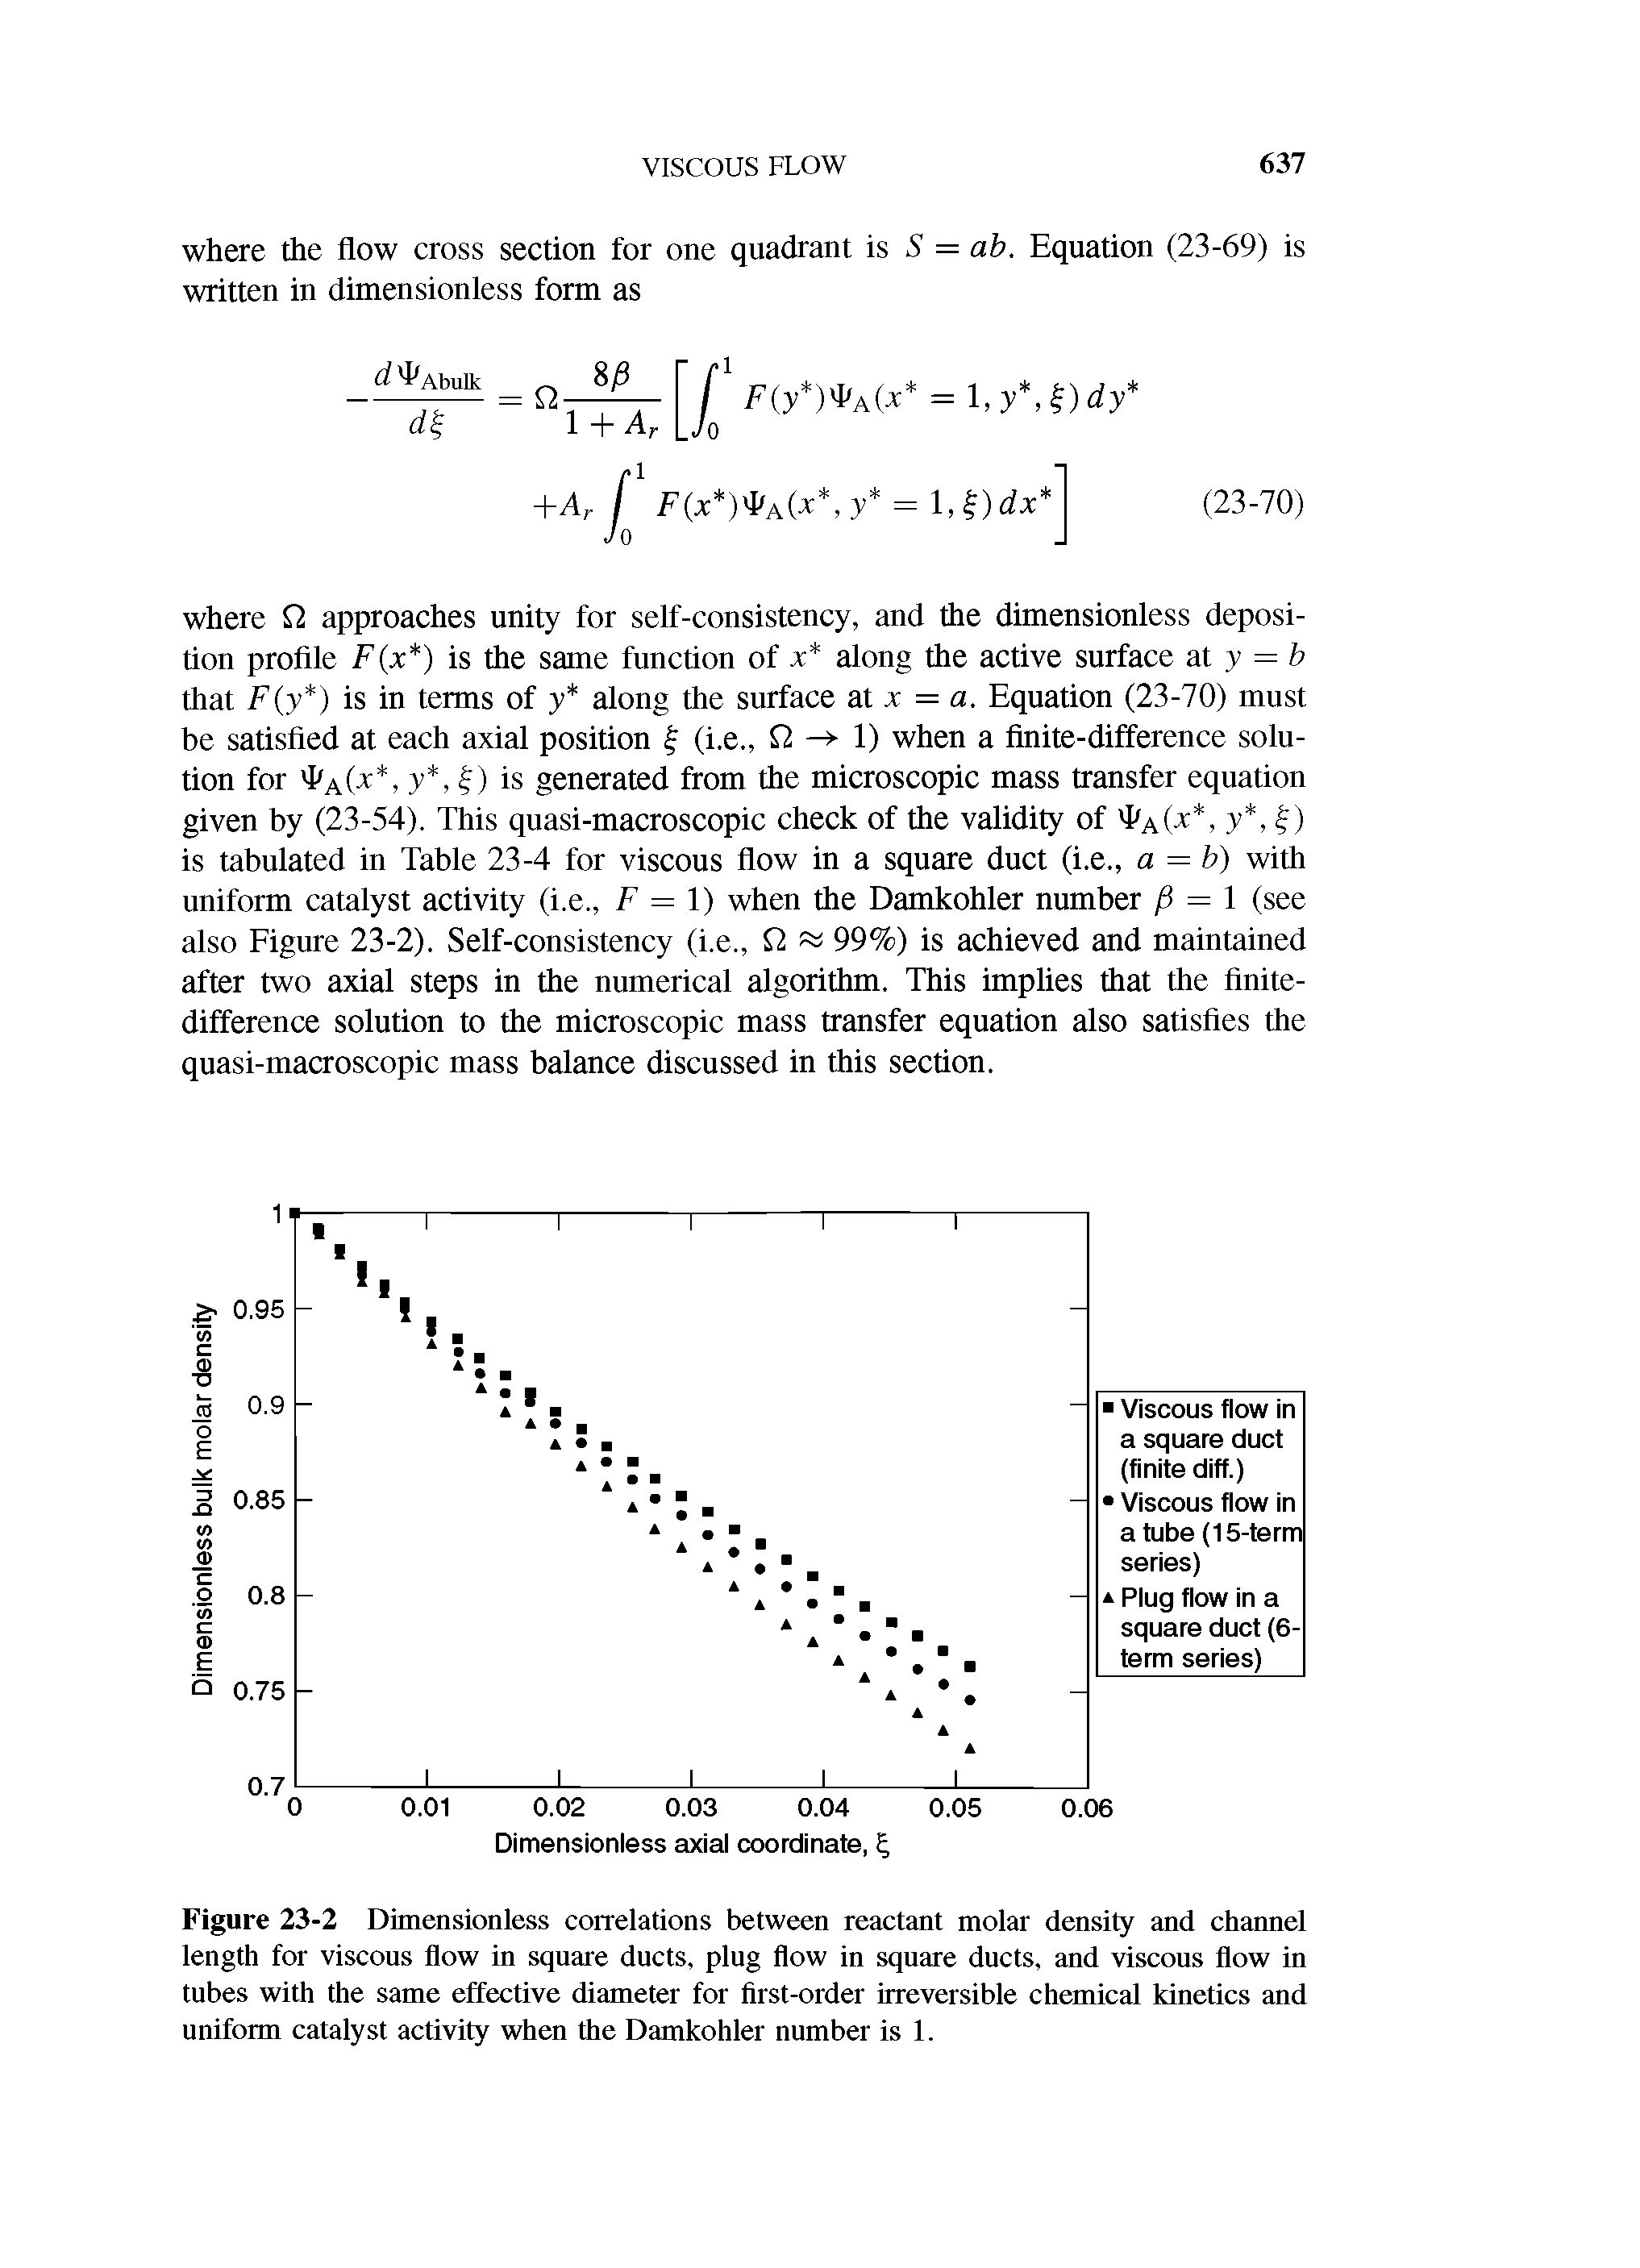 Figure 23-2 Dimensionless correlations between reactant molar density and channel length for viscous flow in square ducts, plug flow in square ducts, and viscous flow in tubes with the same effective diameter for first-order irreversible chemical kinetics and uniform catalyst activity when the Damkohler number is 1.